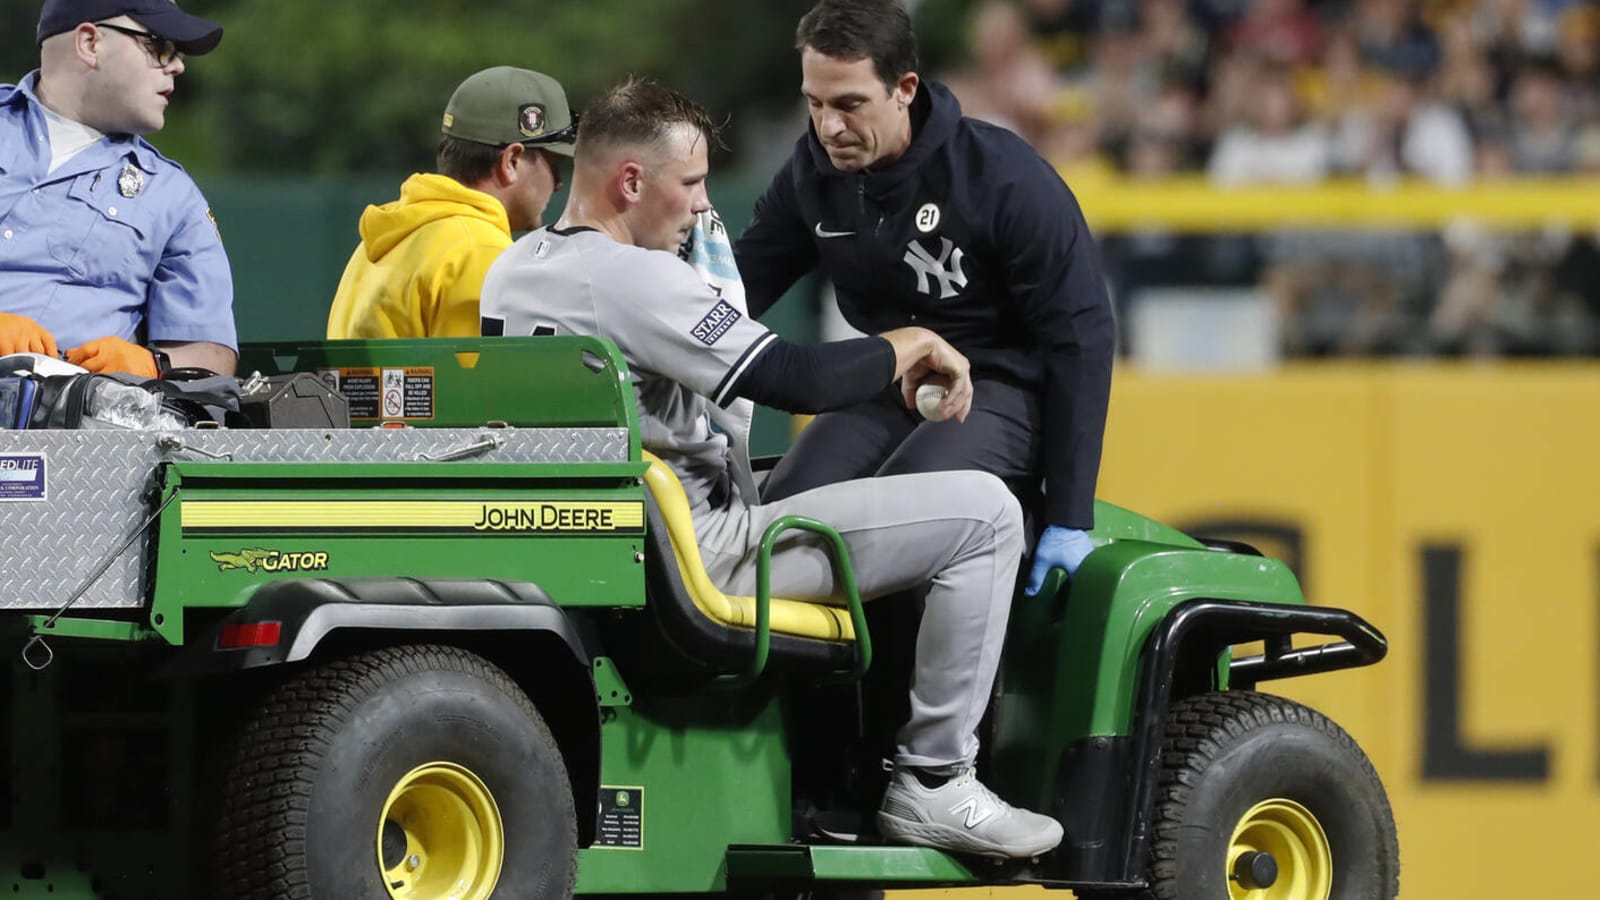 Yankees pitcher carted off after taking line drive to head